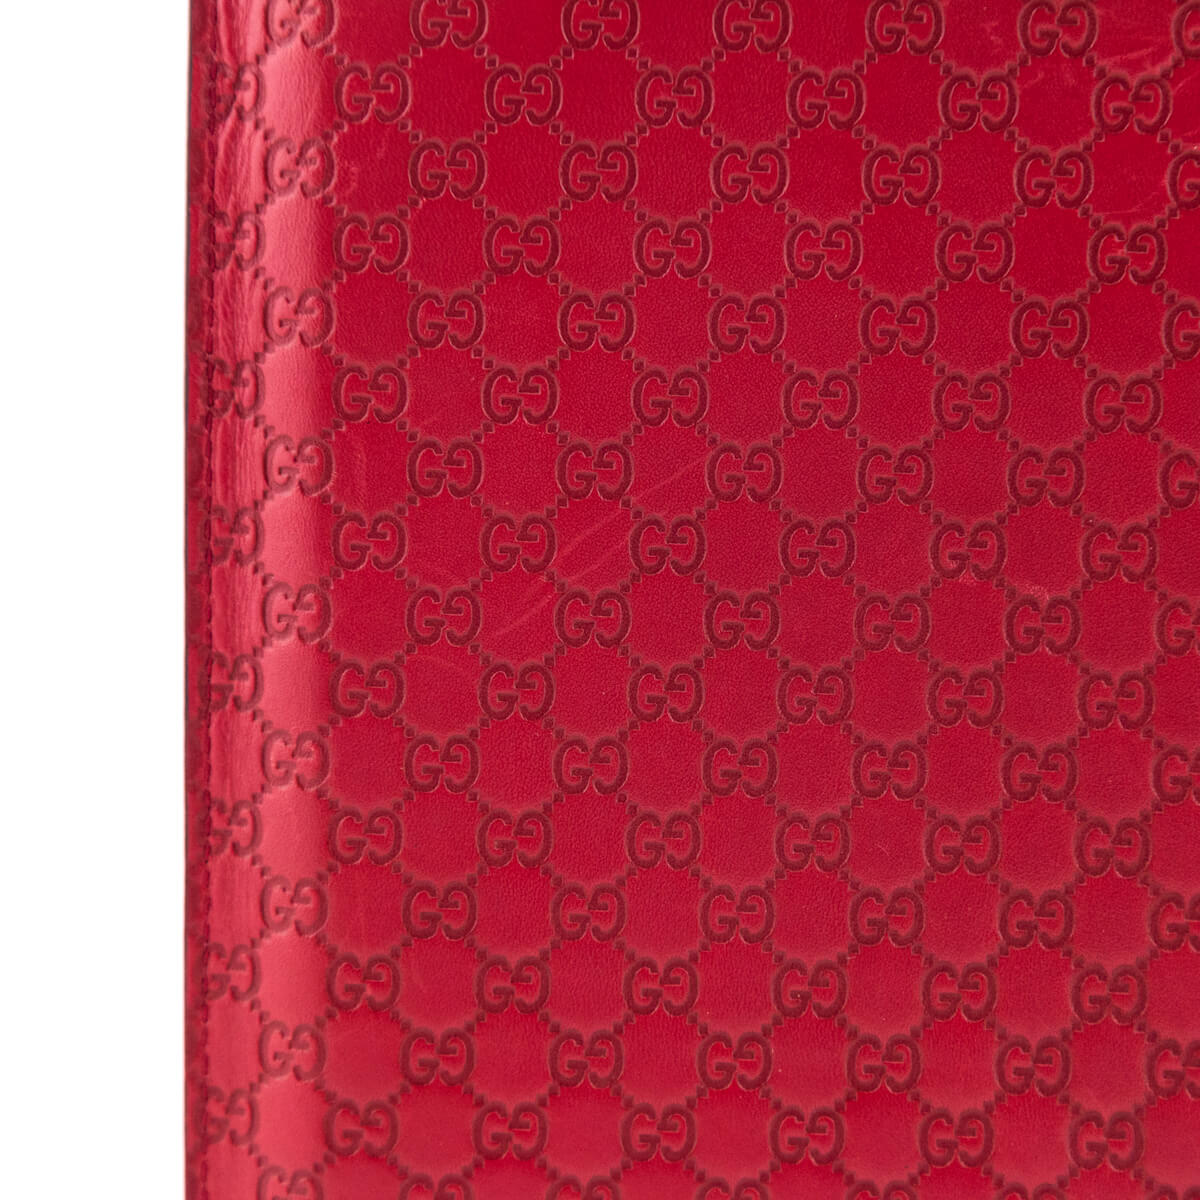 Gucci iPad Case - Red Technology, Accessories - GUC63528